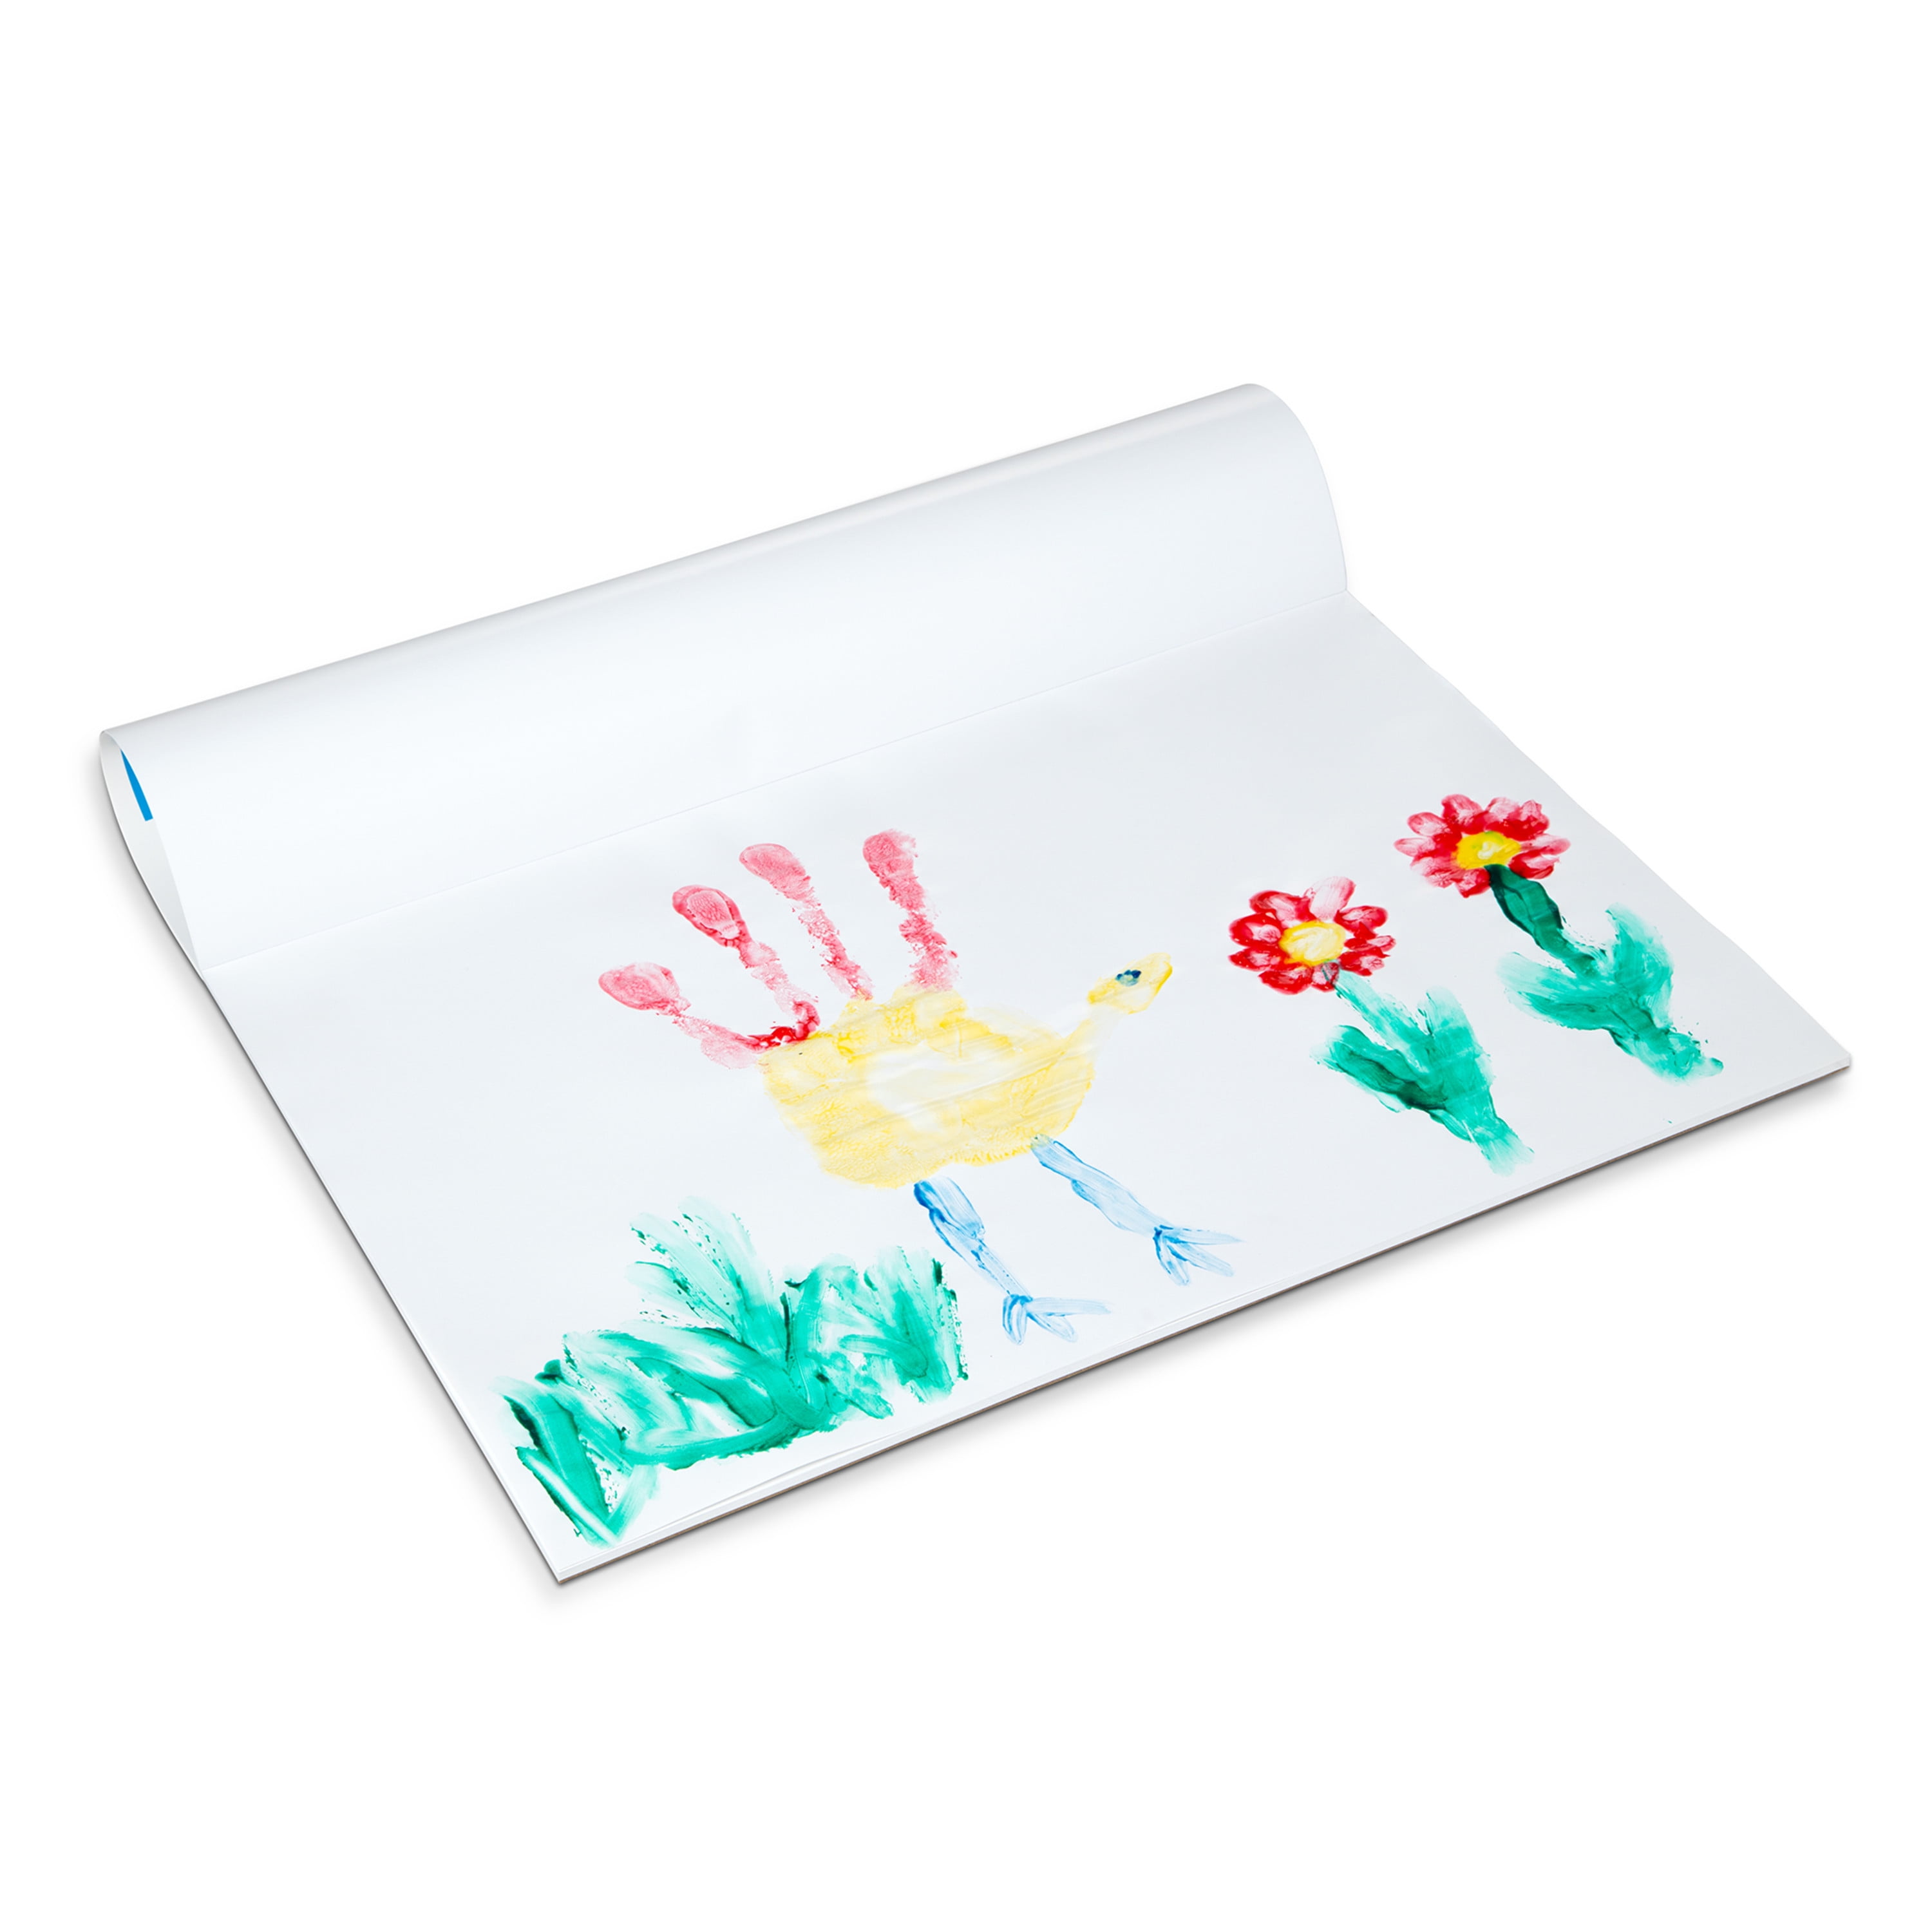 11 x 17 Finger Painting Paper Pad - 25 Sheets 60lb (100gsm) Acid Free (Pack  of 2 Pads), 11” x 17” - 2 Pads - Food 4 Less